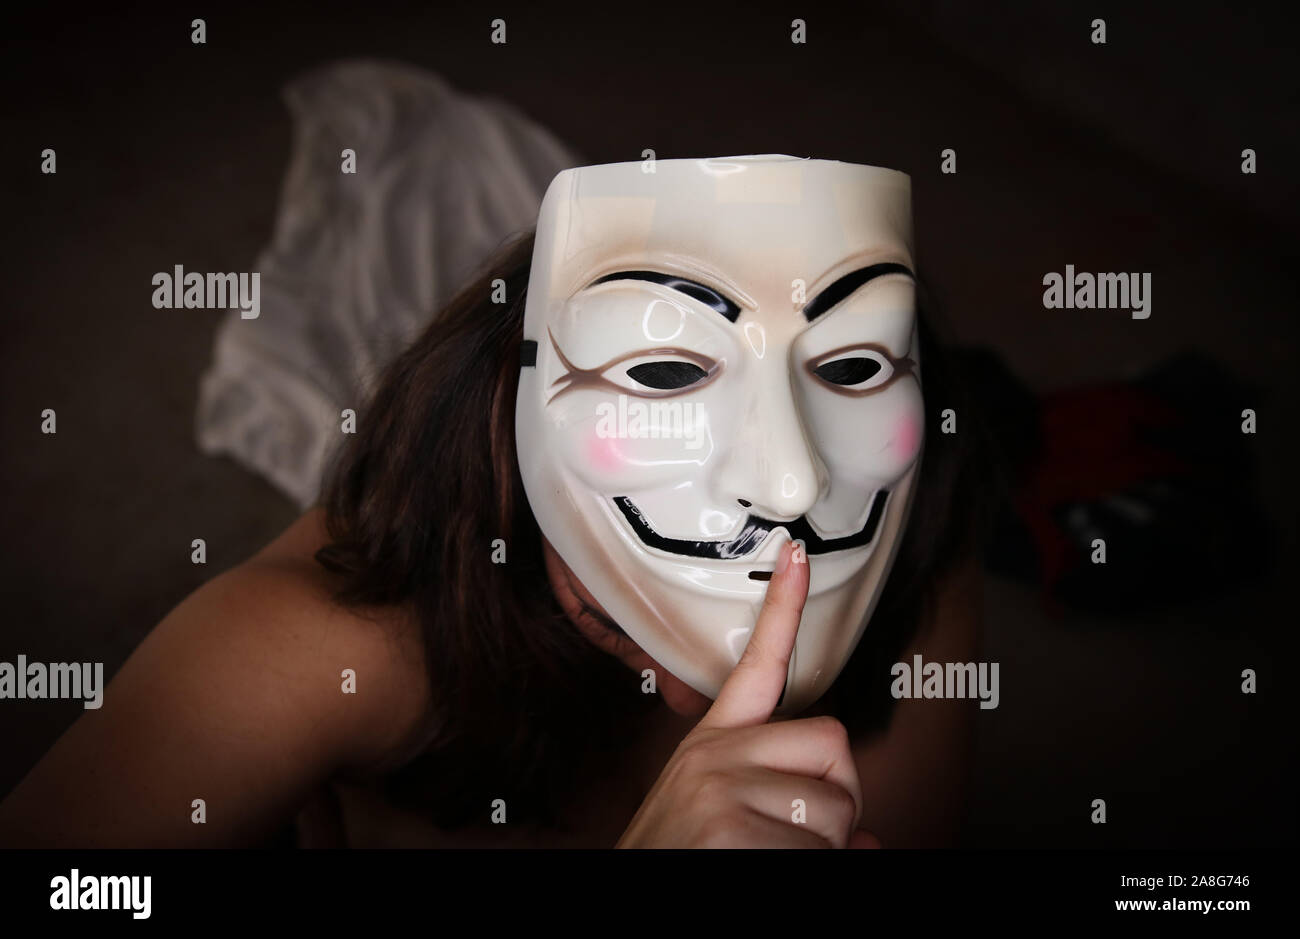 Revolution and Reform. Anti-establishment and rebellion. A girl wears a Guy Fawkes mask and holds a finger up that silence the viewer. Stock Photo